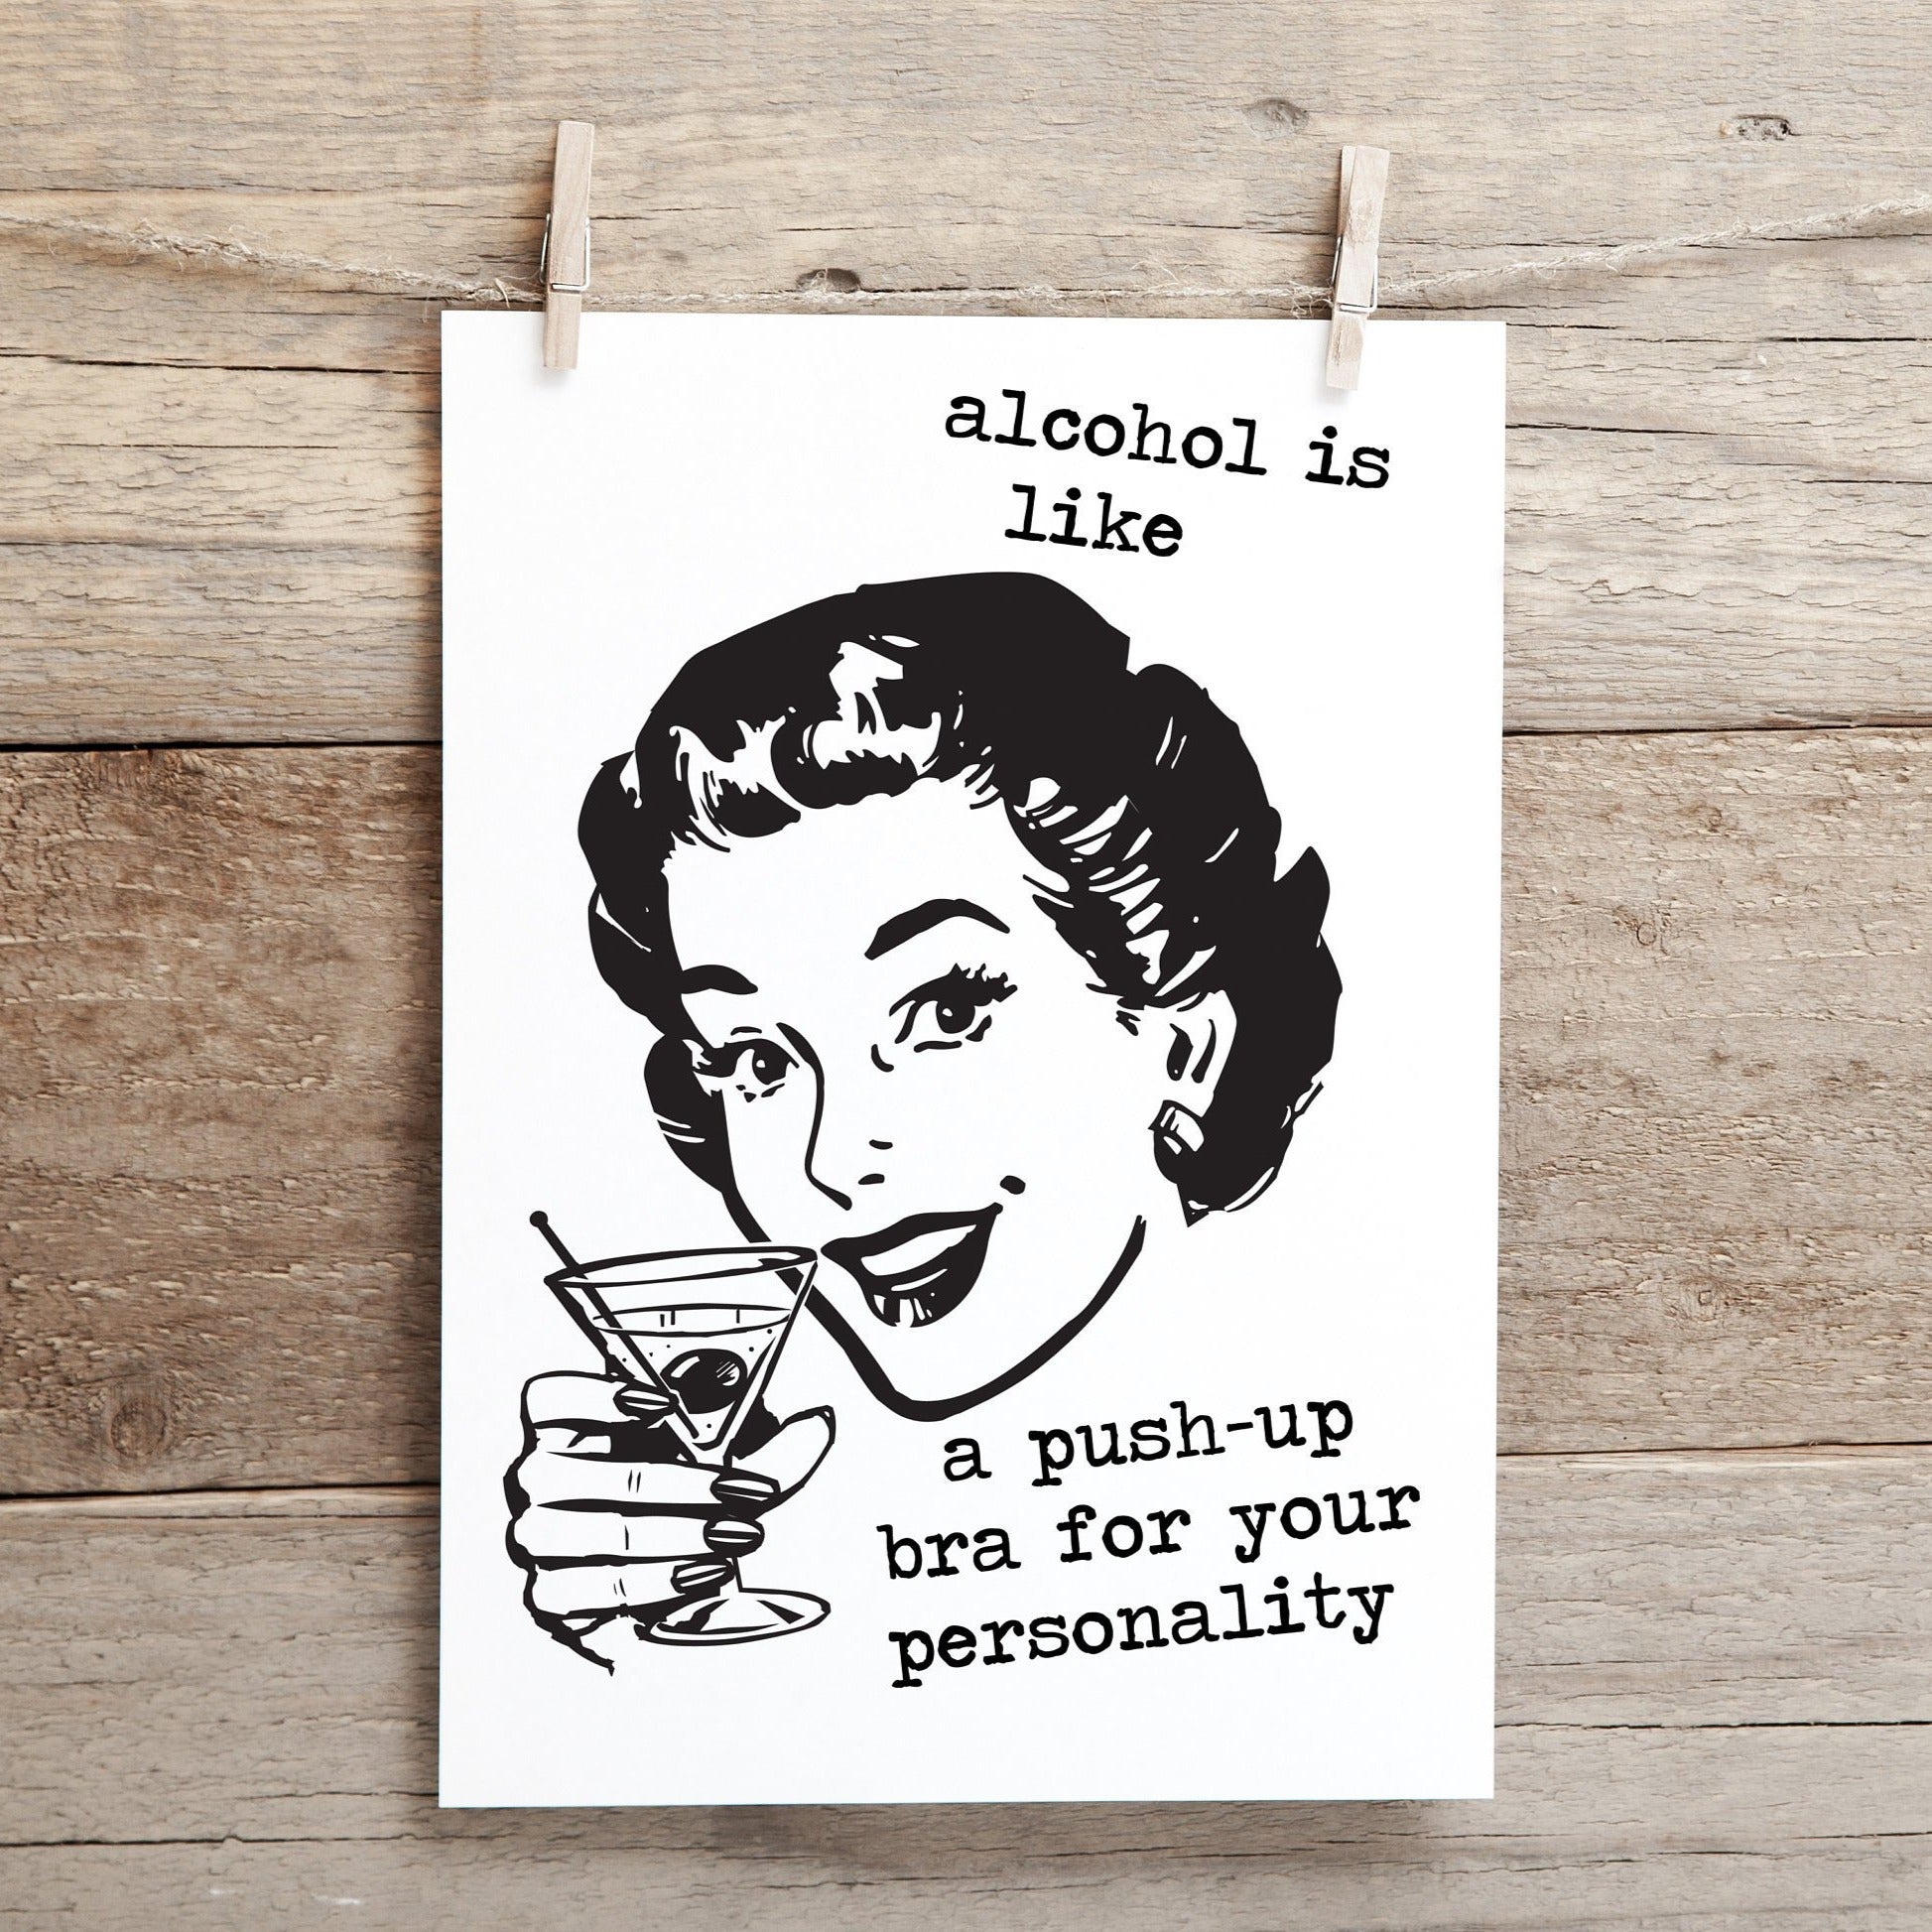 Alcohol is like a push up bra for your personality .. funny, inappropr –  CleverishCo